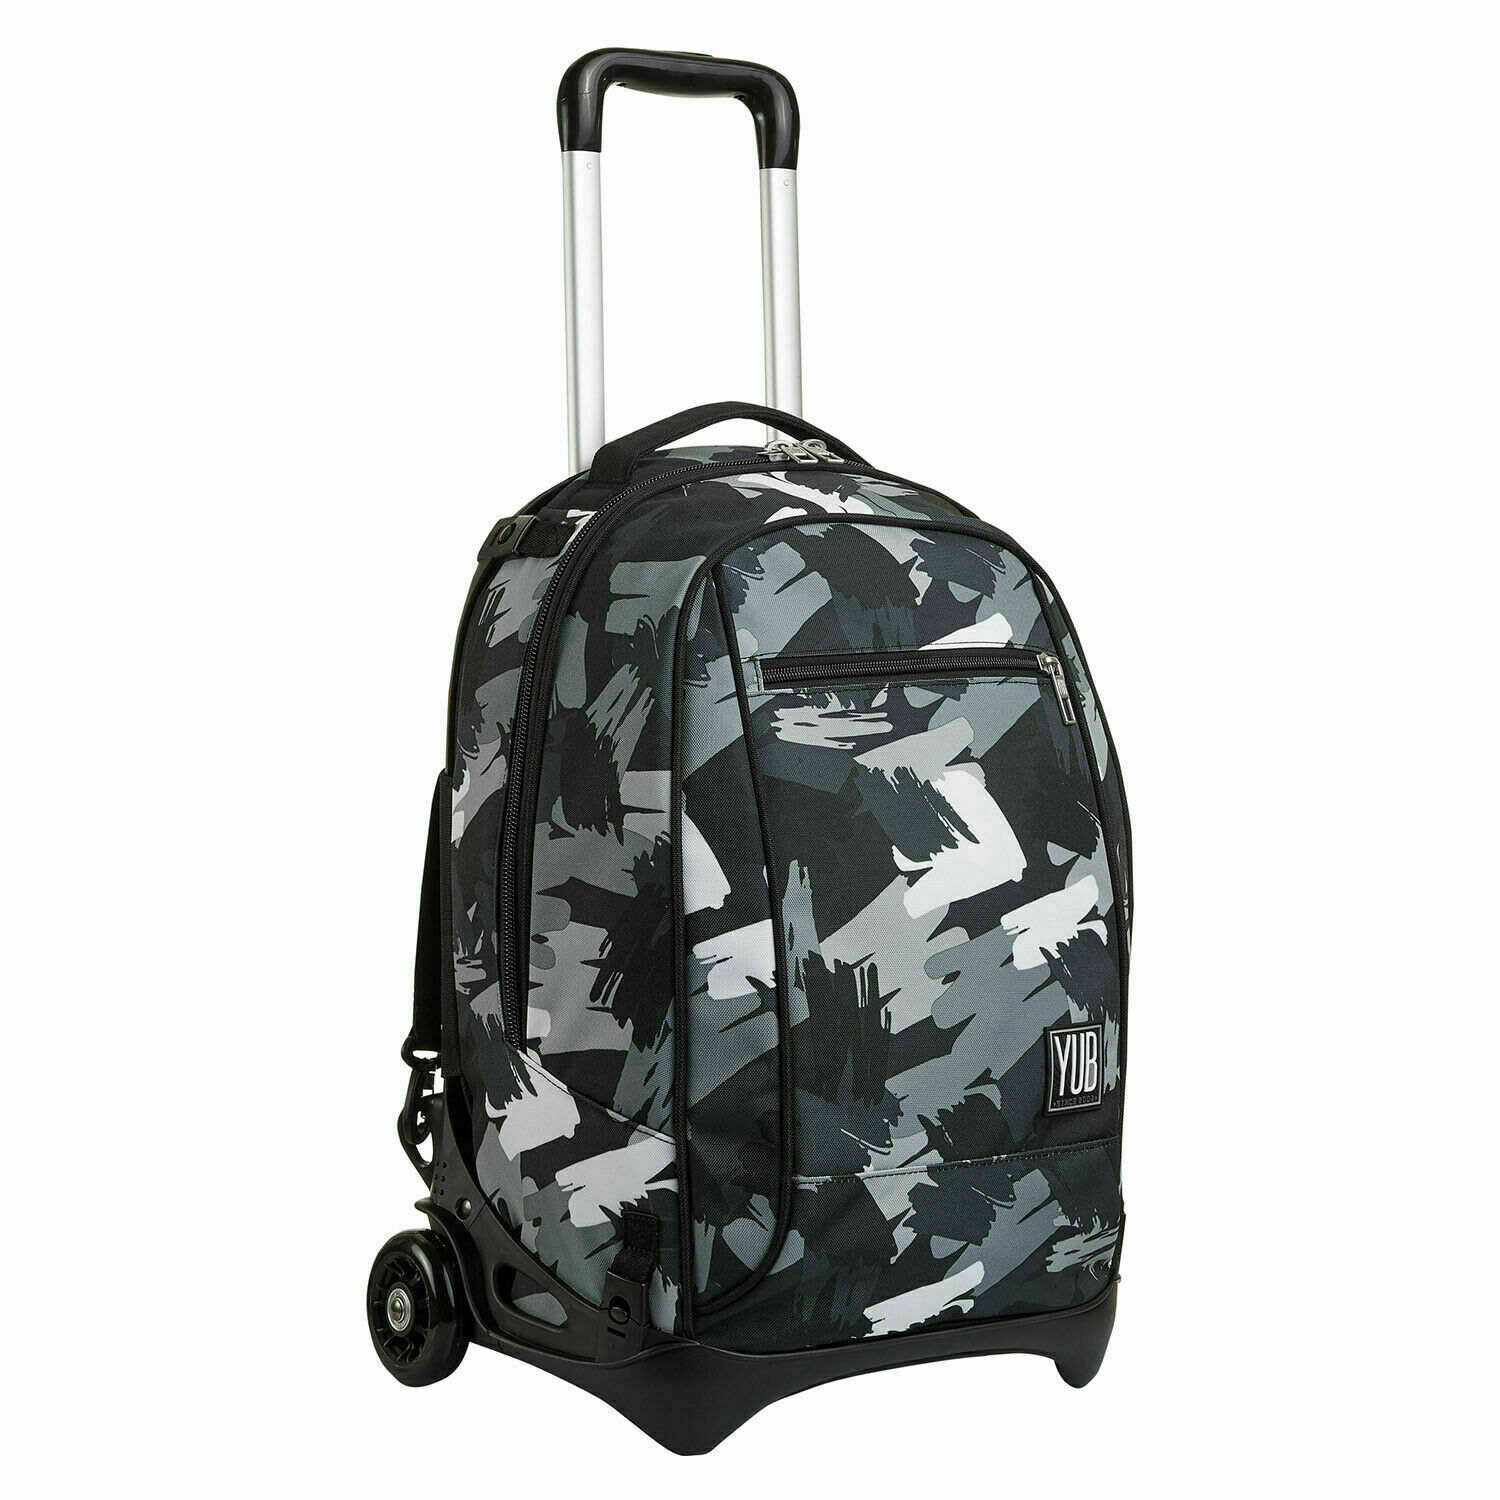 Featured image for “Zaino YUB Trolley Jack 2 RUOTE Painted Graphic CAMO Nero”